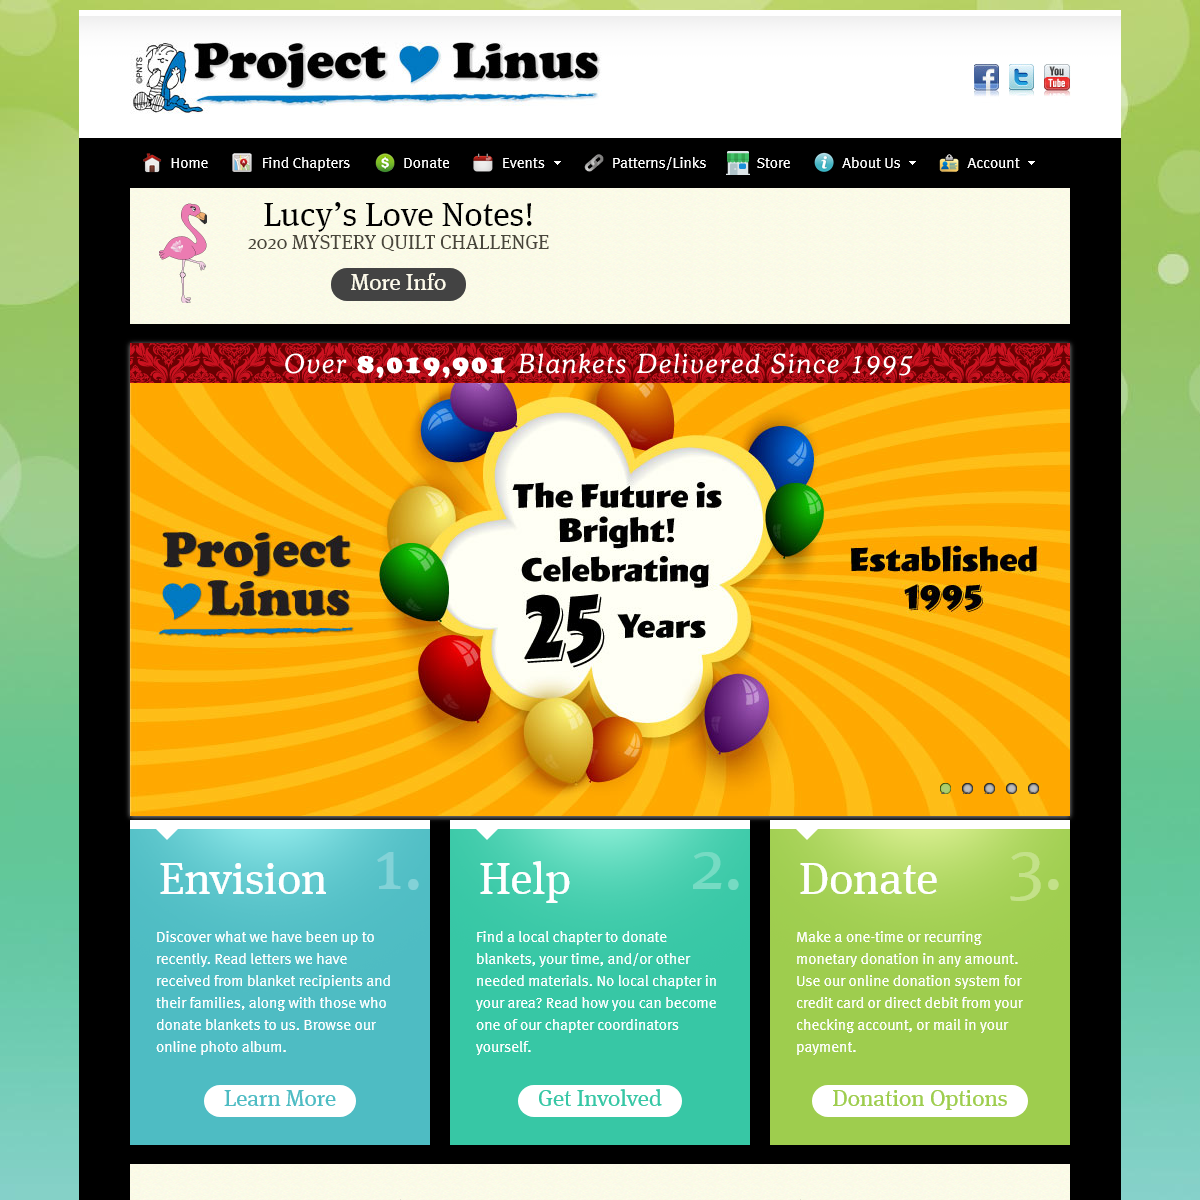 A complete backup of projectlinus.org